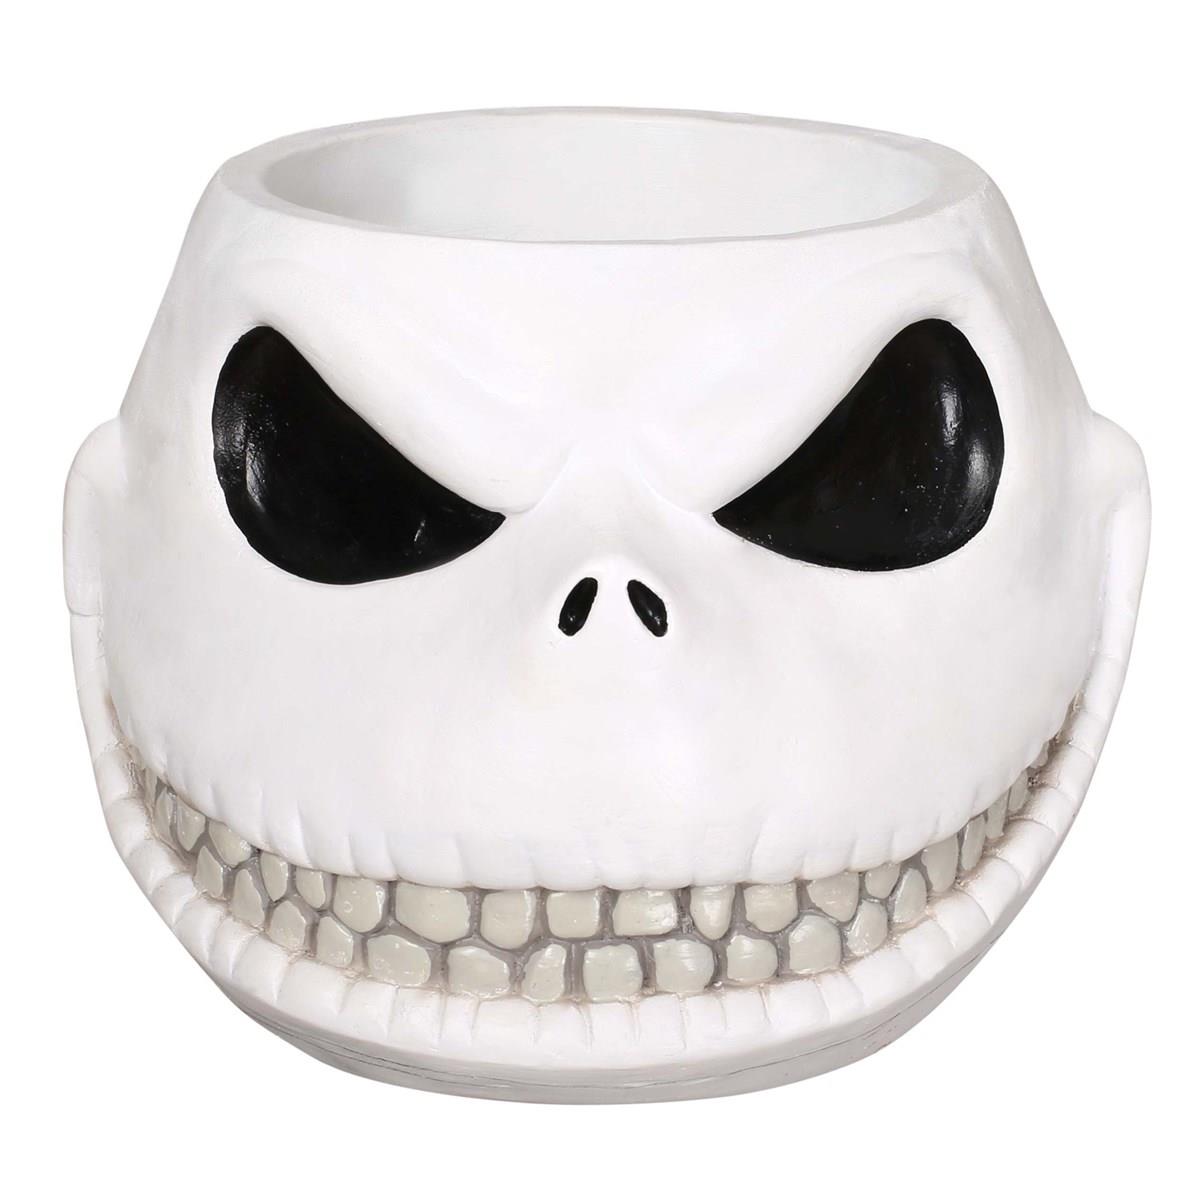 248360 8 In. The Nightmare Before Christmas Jack Skellington Candy Bowl, White